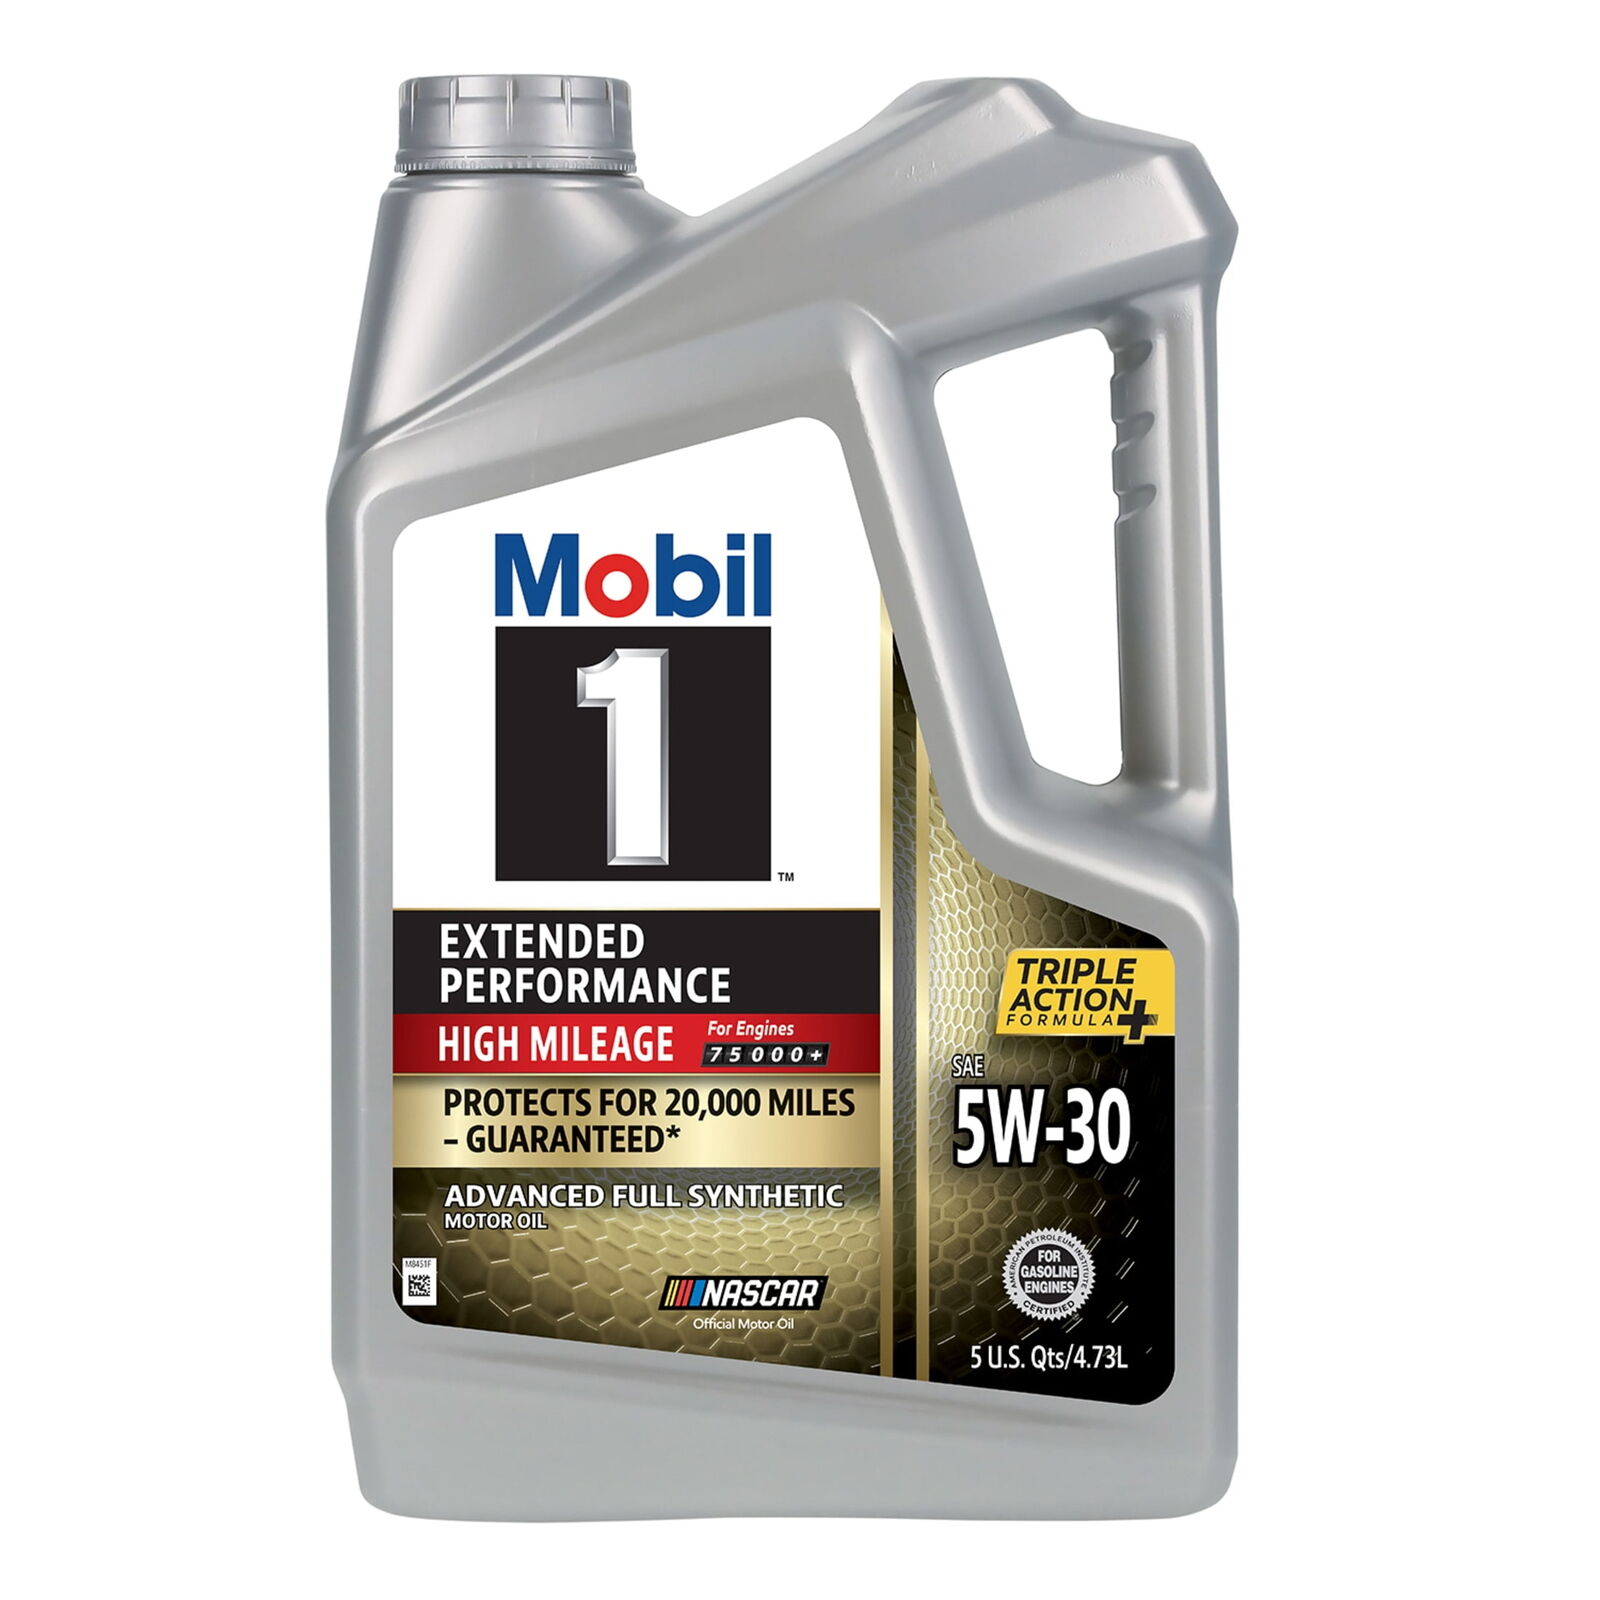 Mobil 1 Extended Performance High Mileage Full Synthetic Motor Oil 5W-30